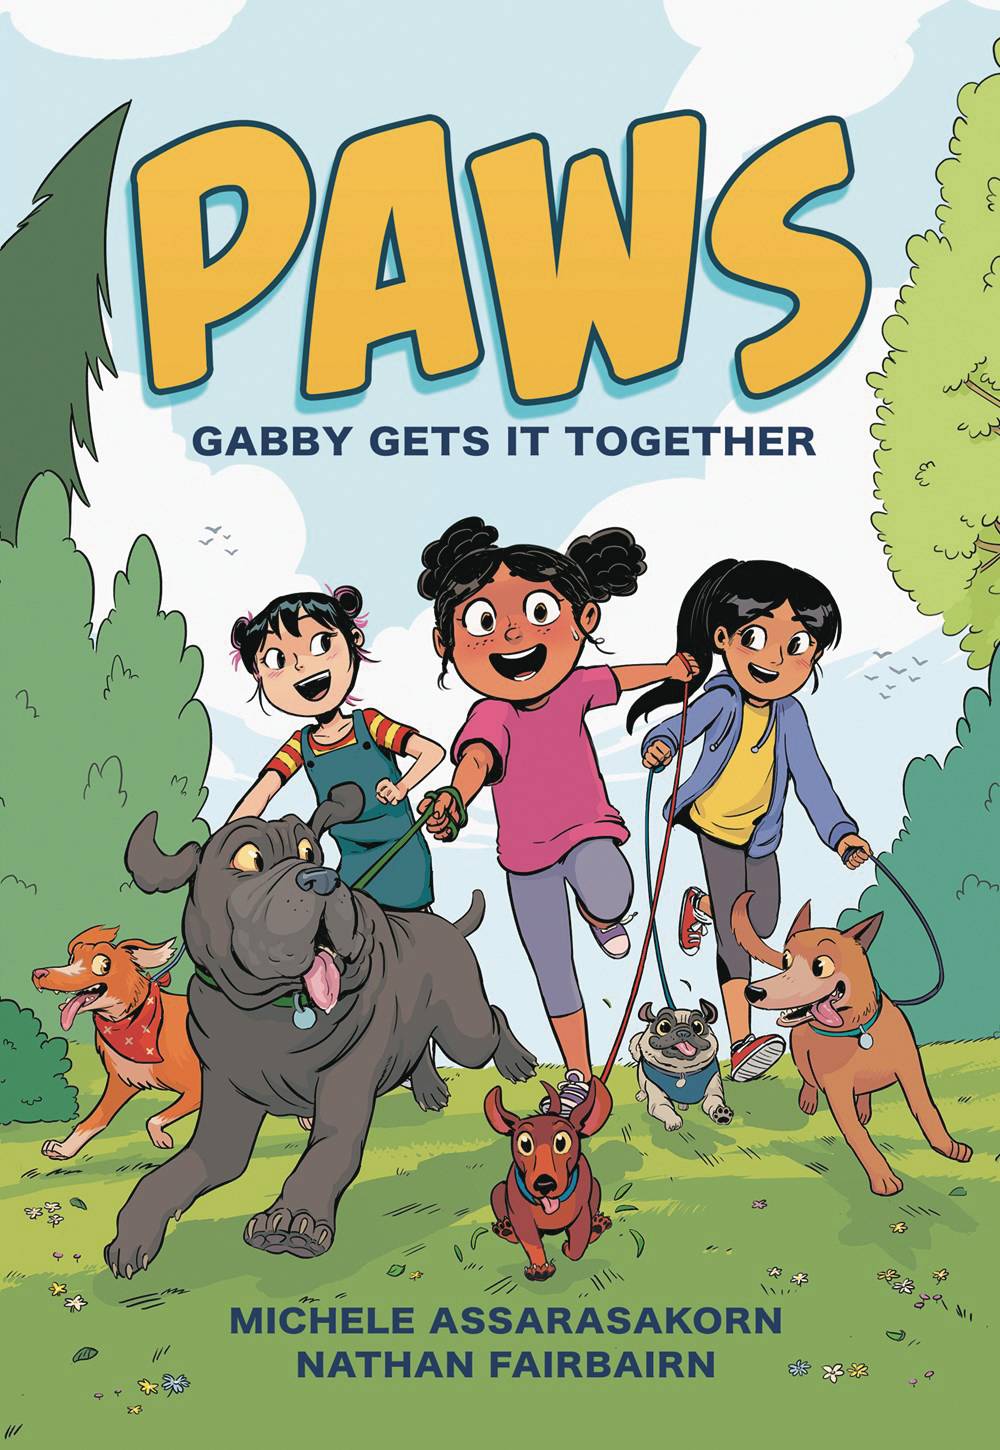 Paws Vol. 01 Gabby Gets It Together